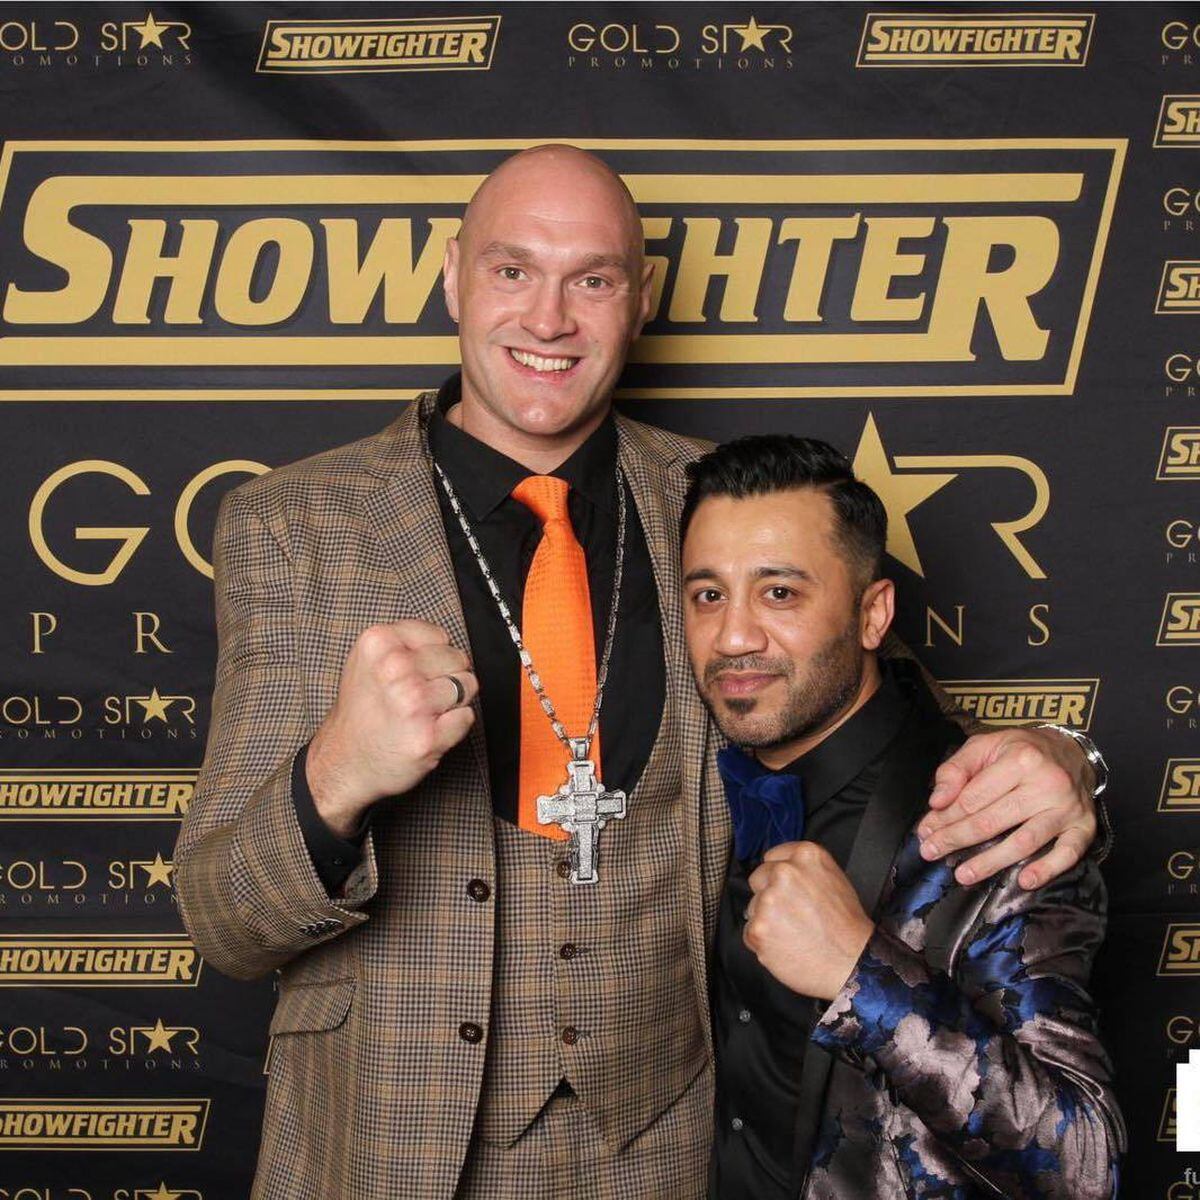 Showfighter hosted an evening with Tyson Fury in Birmingham 